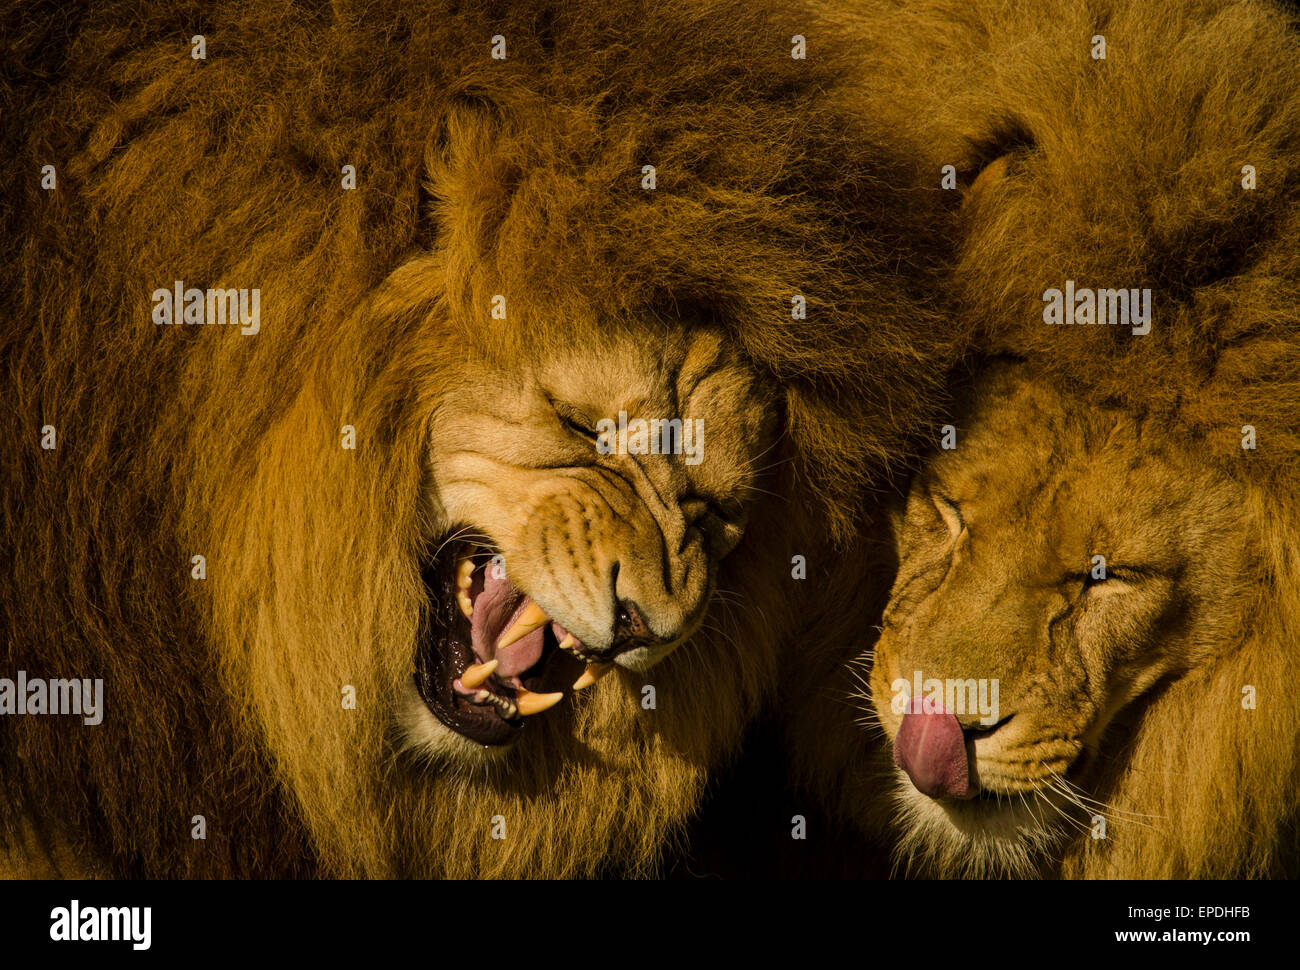 Pictured here are African Lions sharing a moment together and communicating with a roar. They are captive lions Photographed in a wildlife park. Stock Photo